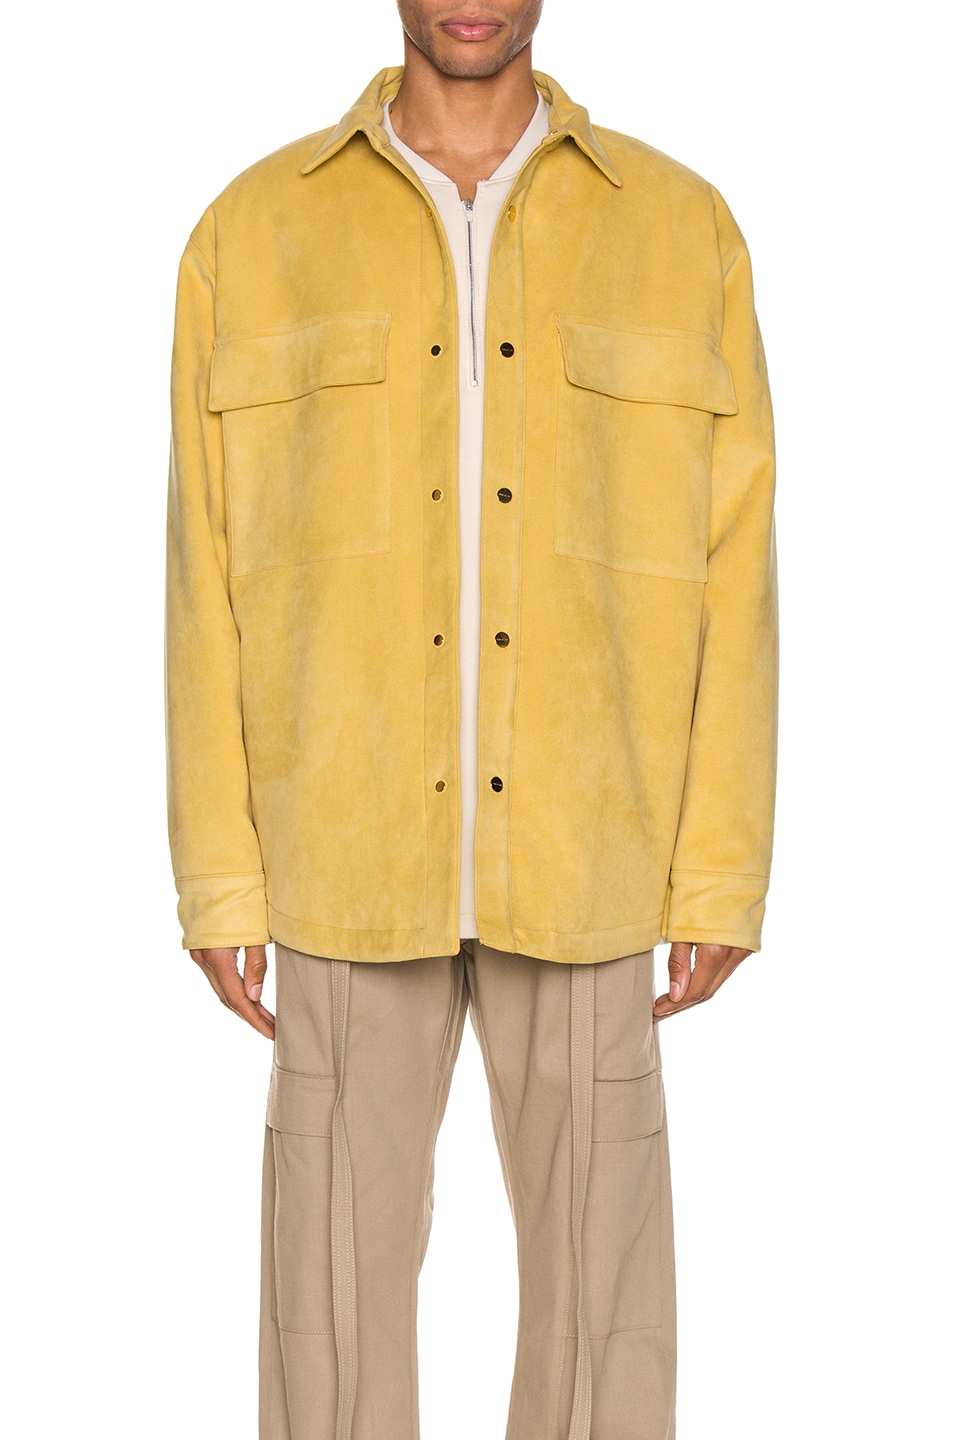 Image 1 of Fear of God Suede Shirt Jacket in Garden Glove Yellow